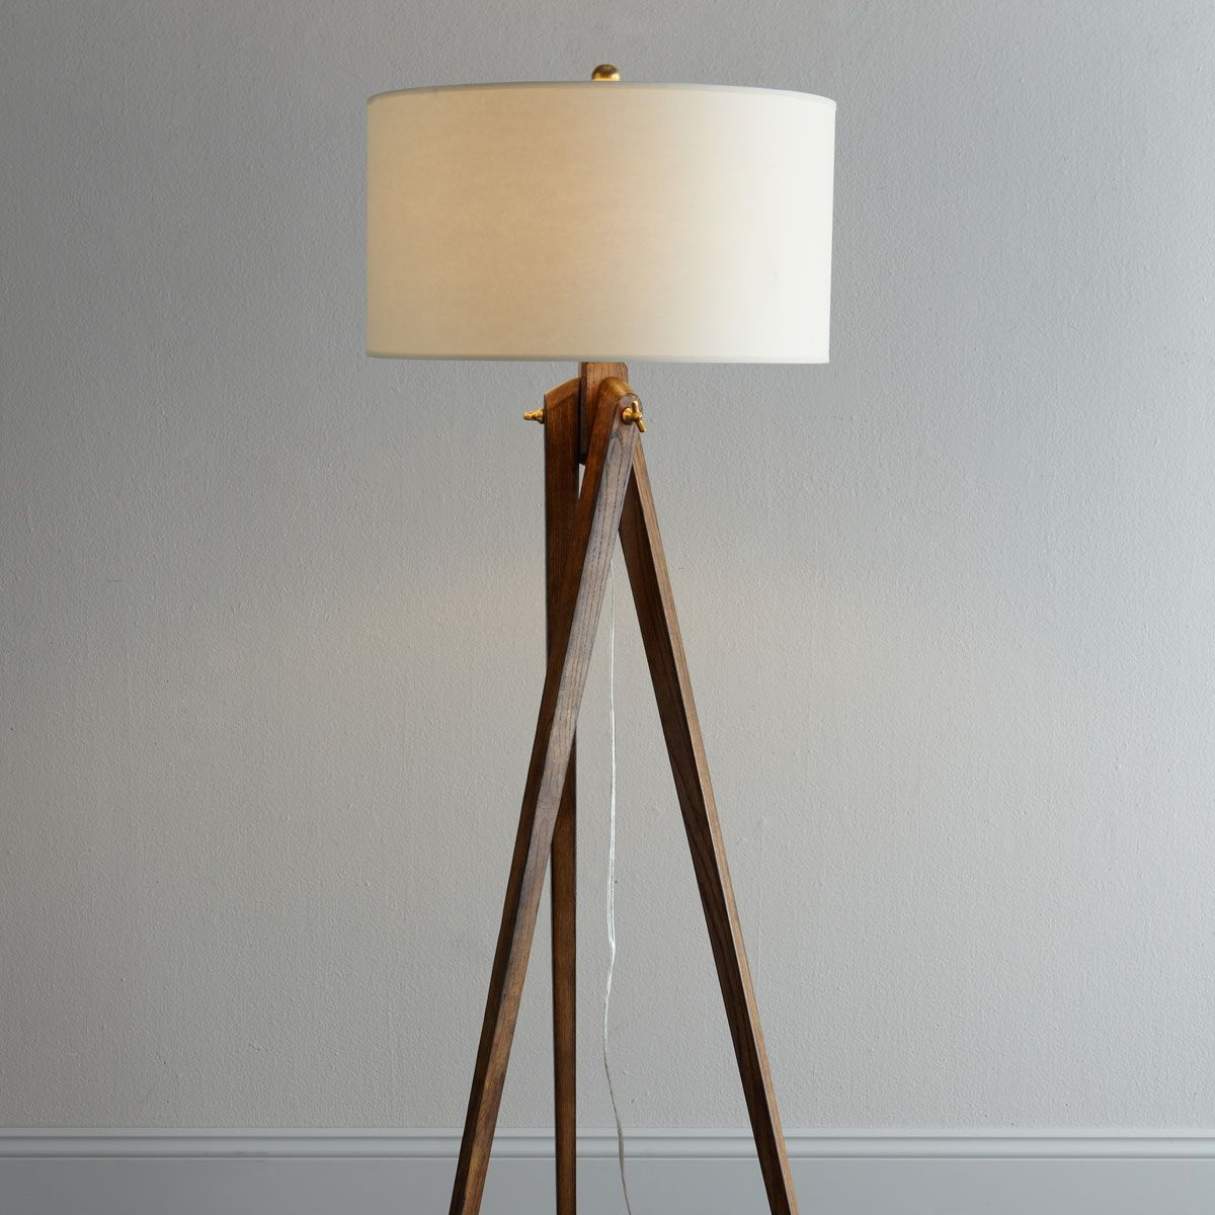 Where To Put A Floor Lamp In The Living Room